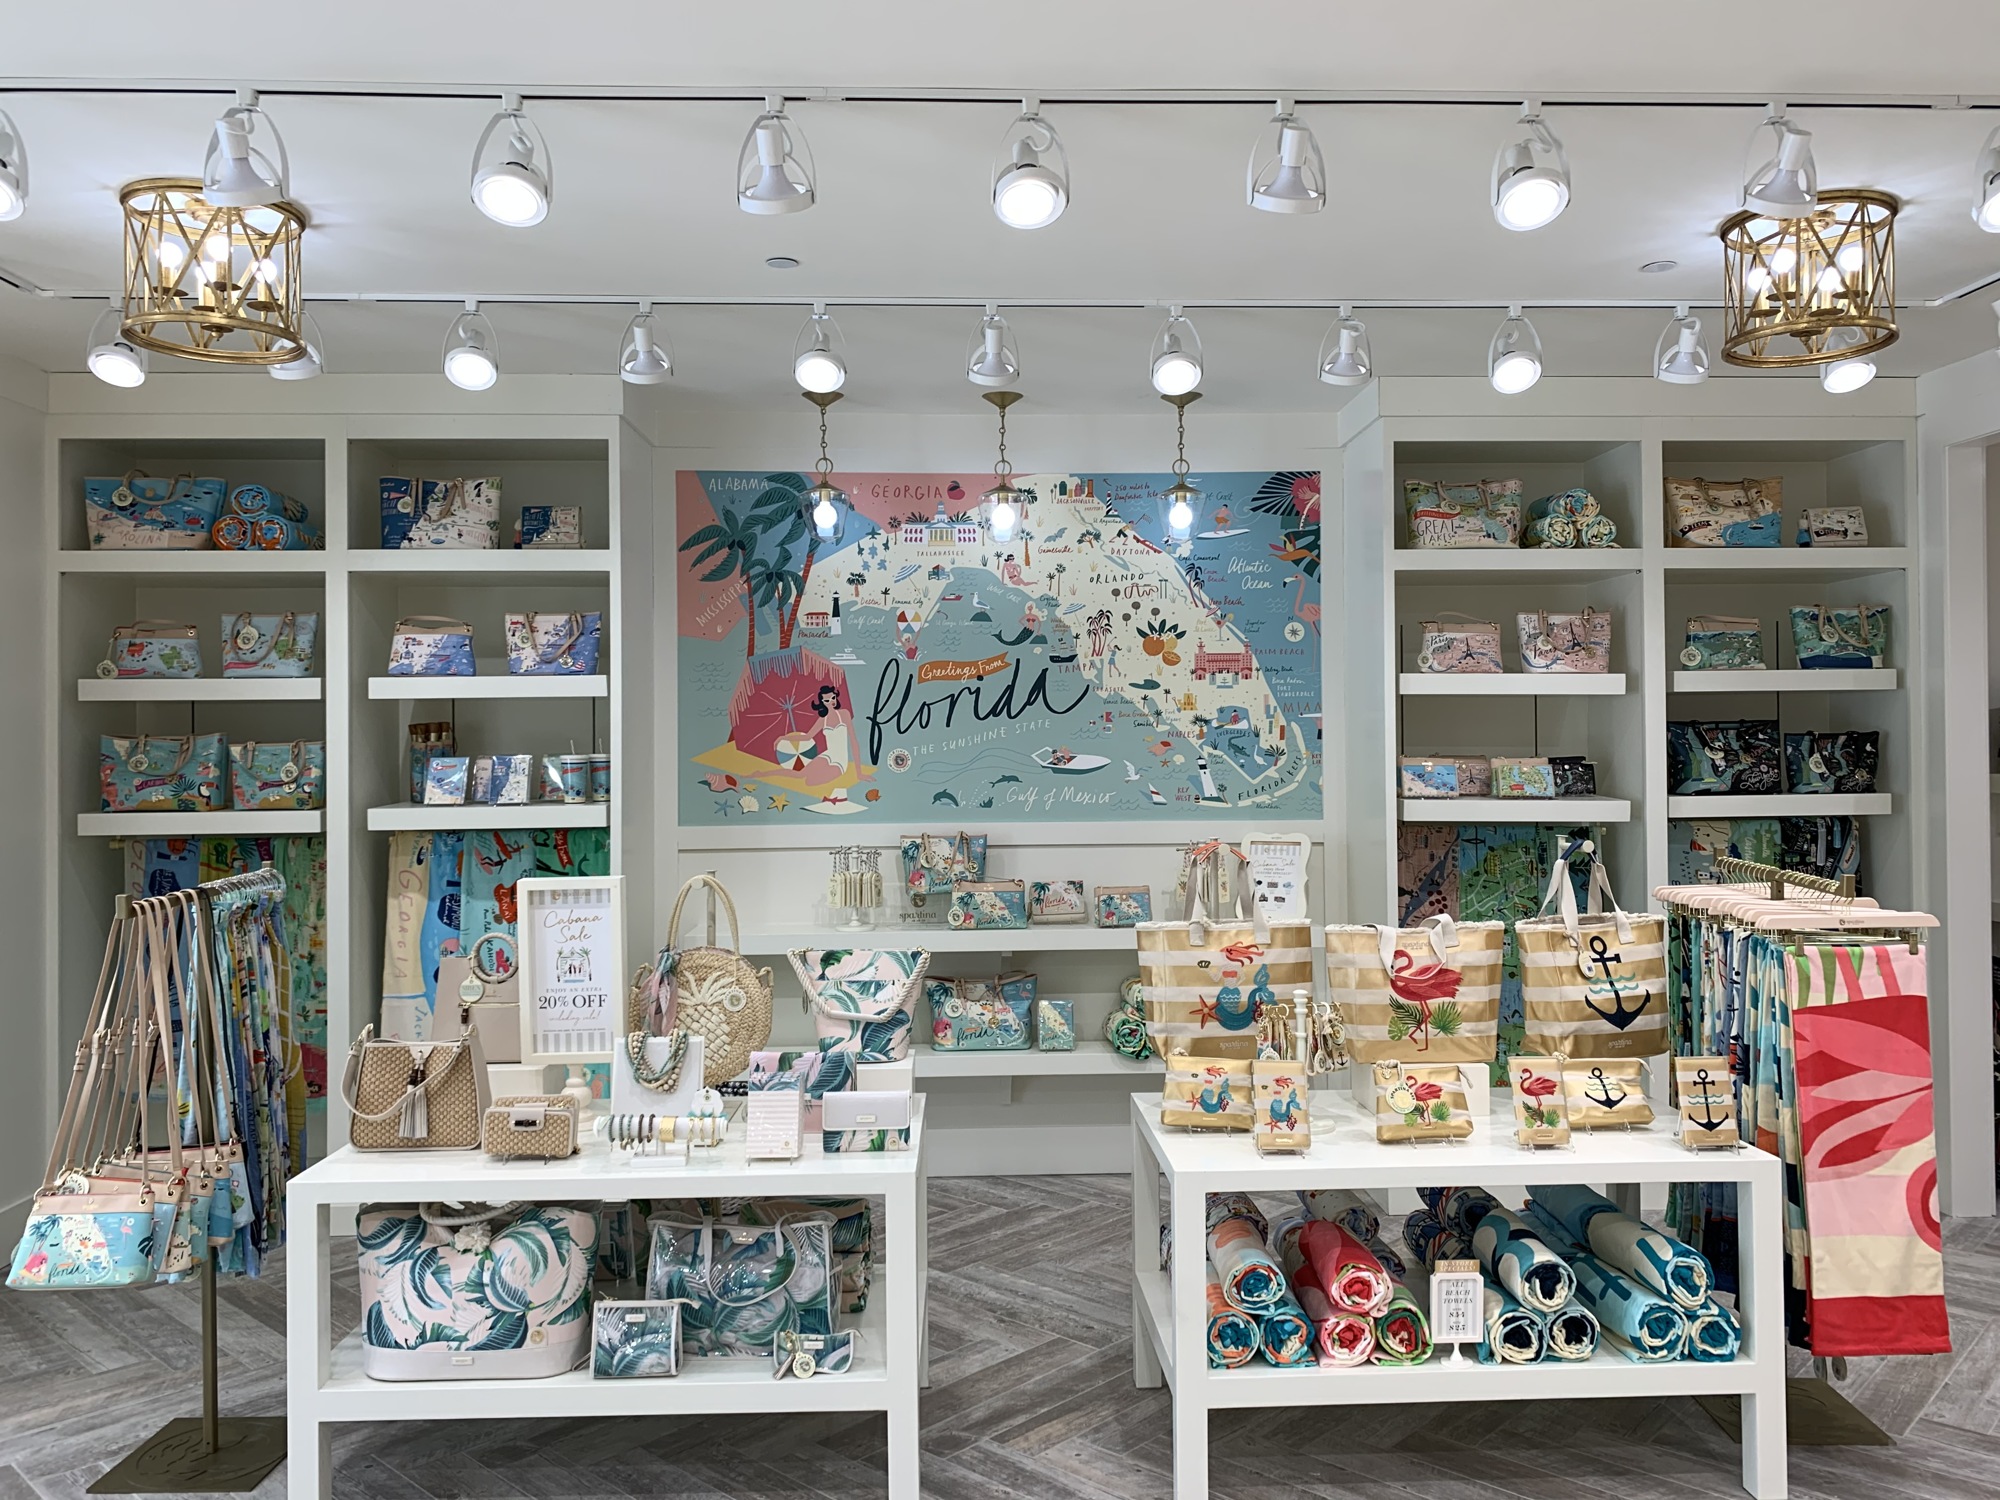 Spartina 449 sells coastal-themed women’s clothing and accessories.